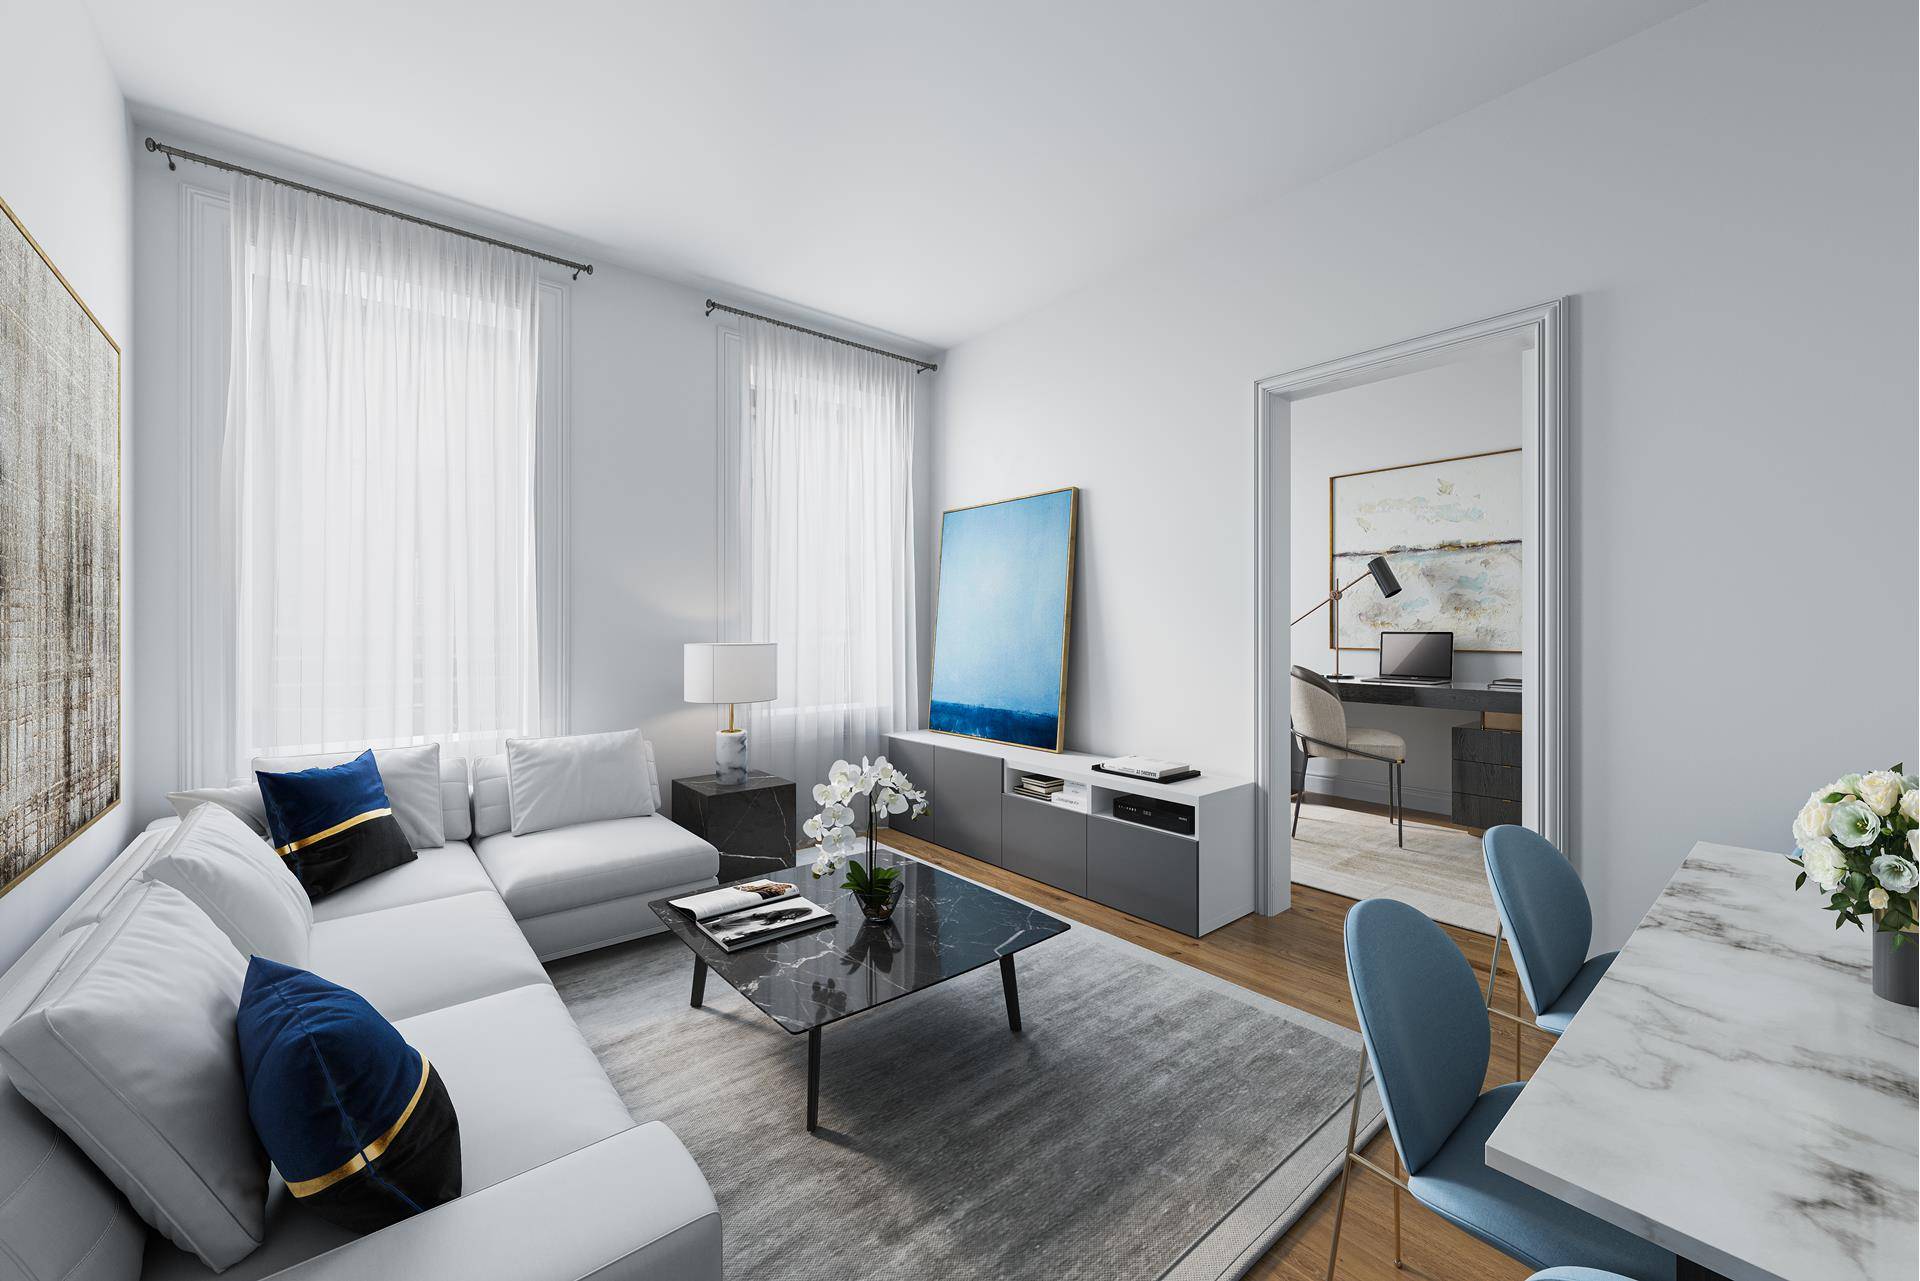 Move right into a comfortable, spacious prewar apartment in vibrant Morningside Heights that awaits your personal touch !